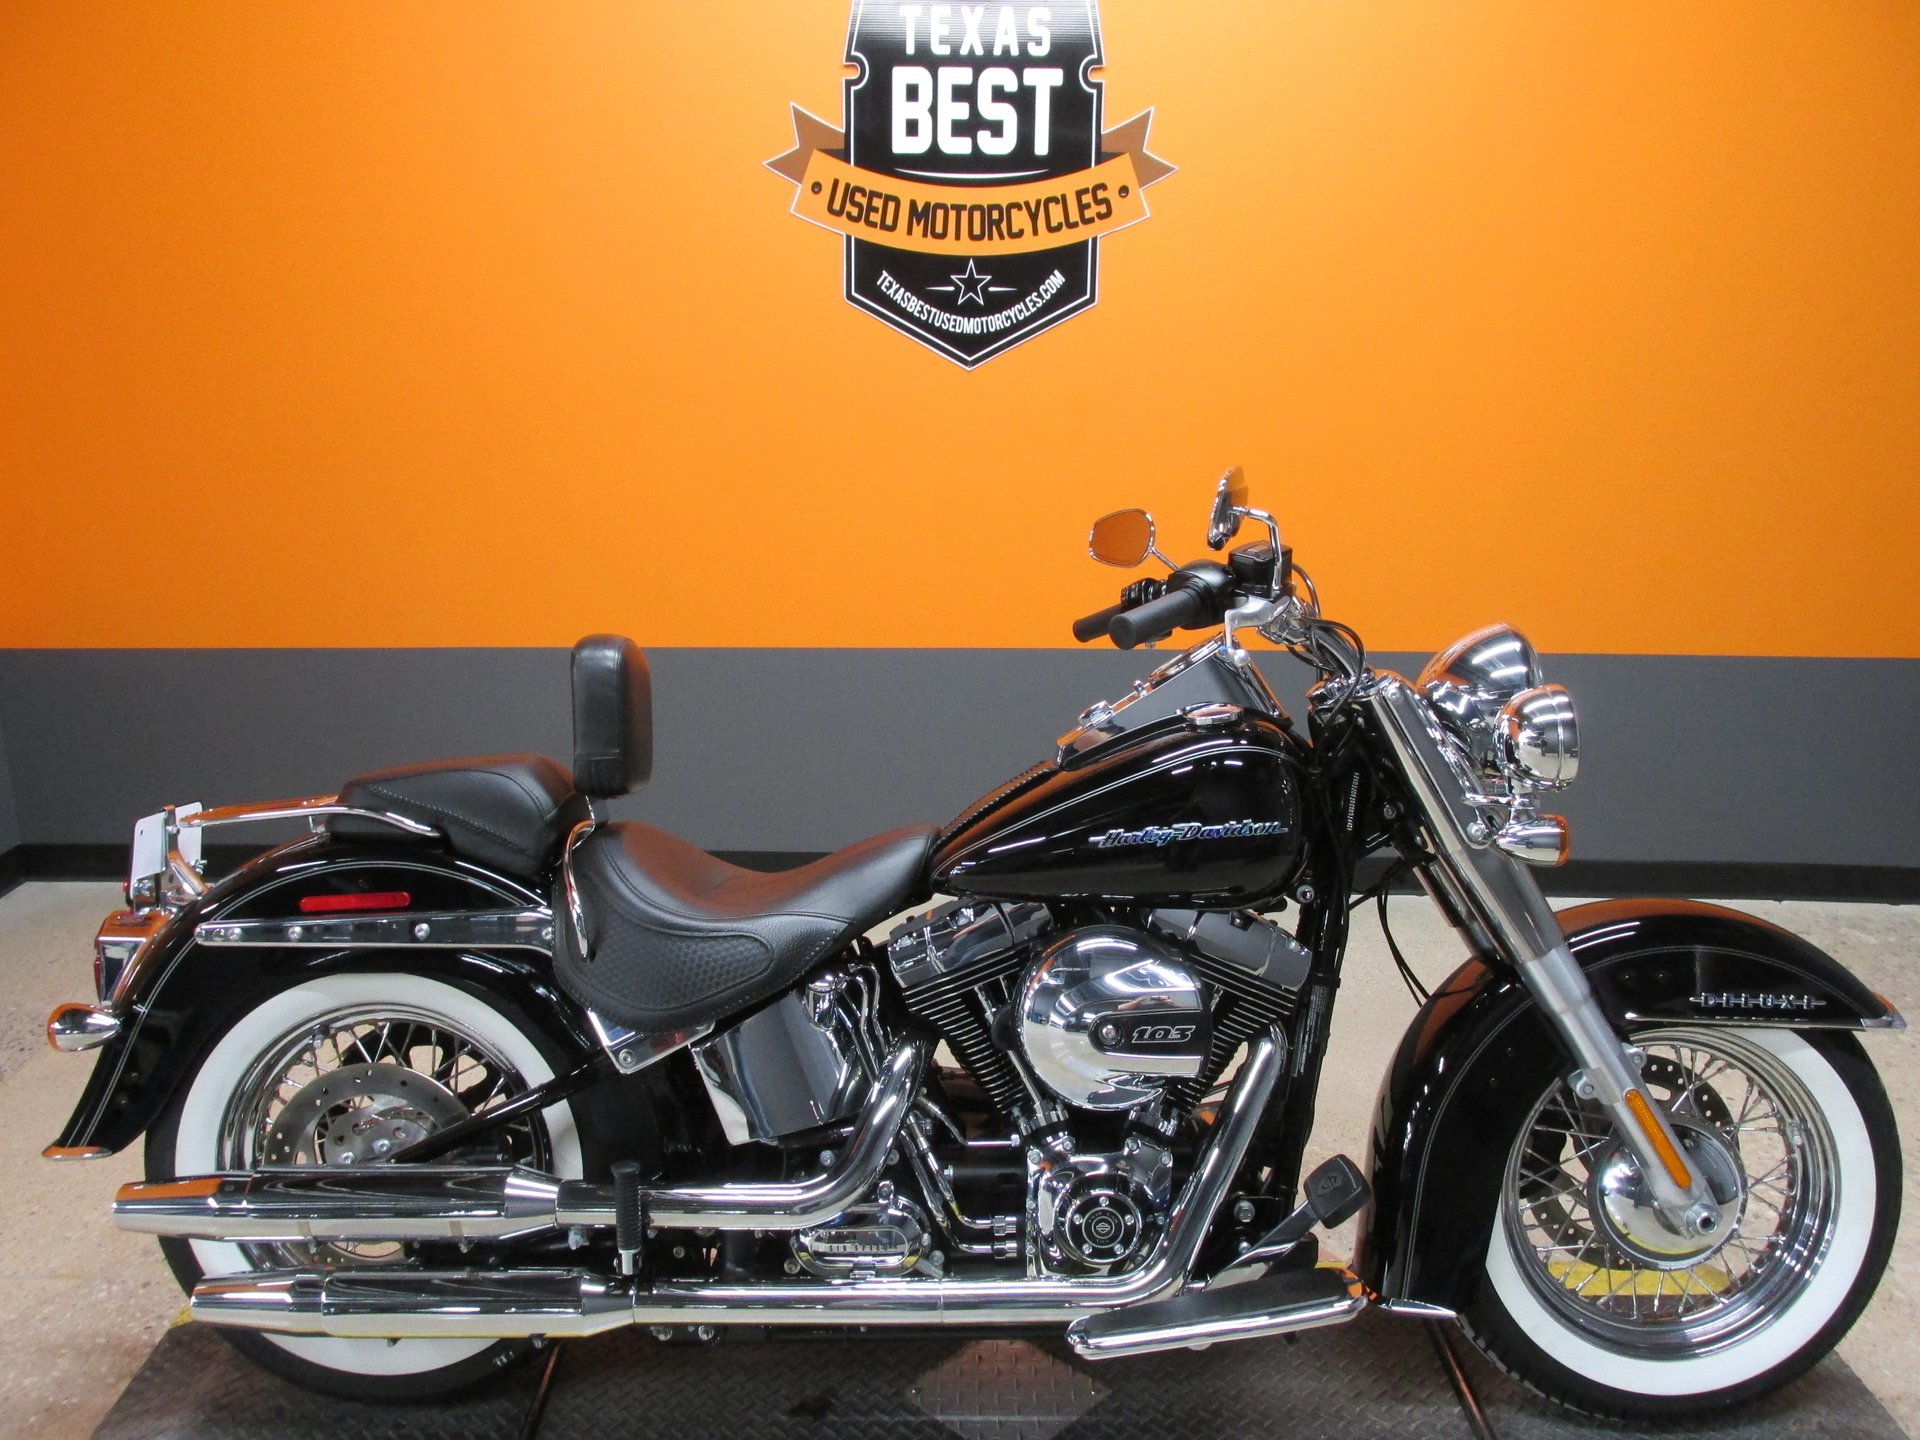 2016 Harley-Davidson Softail Deluxe | American Motorcycle Trading Company -  Used Harley Davidson Motorcycles